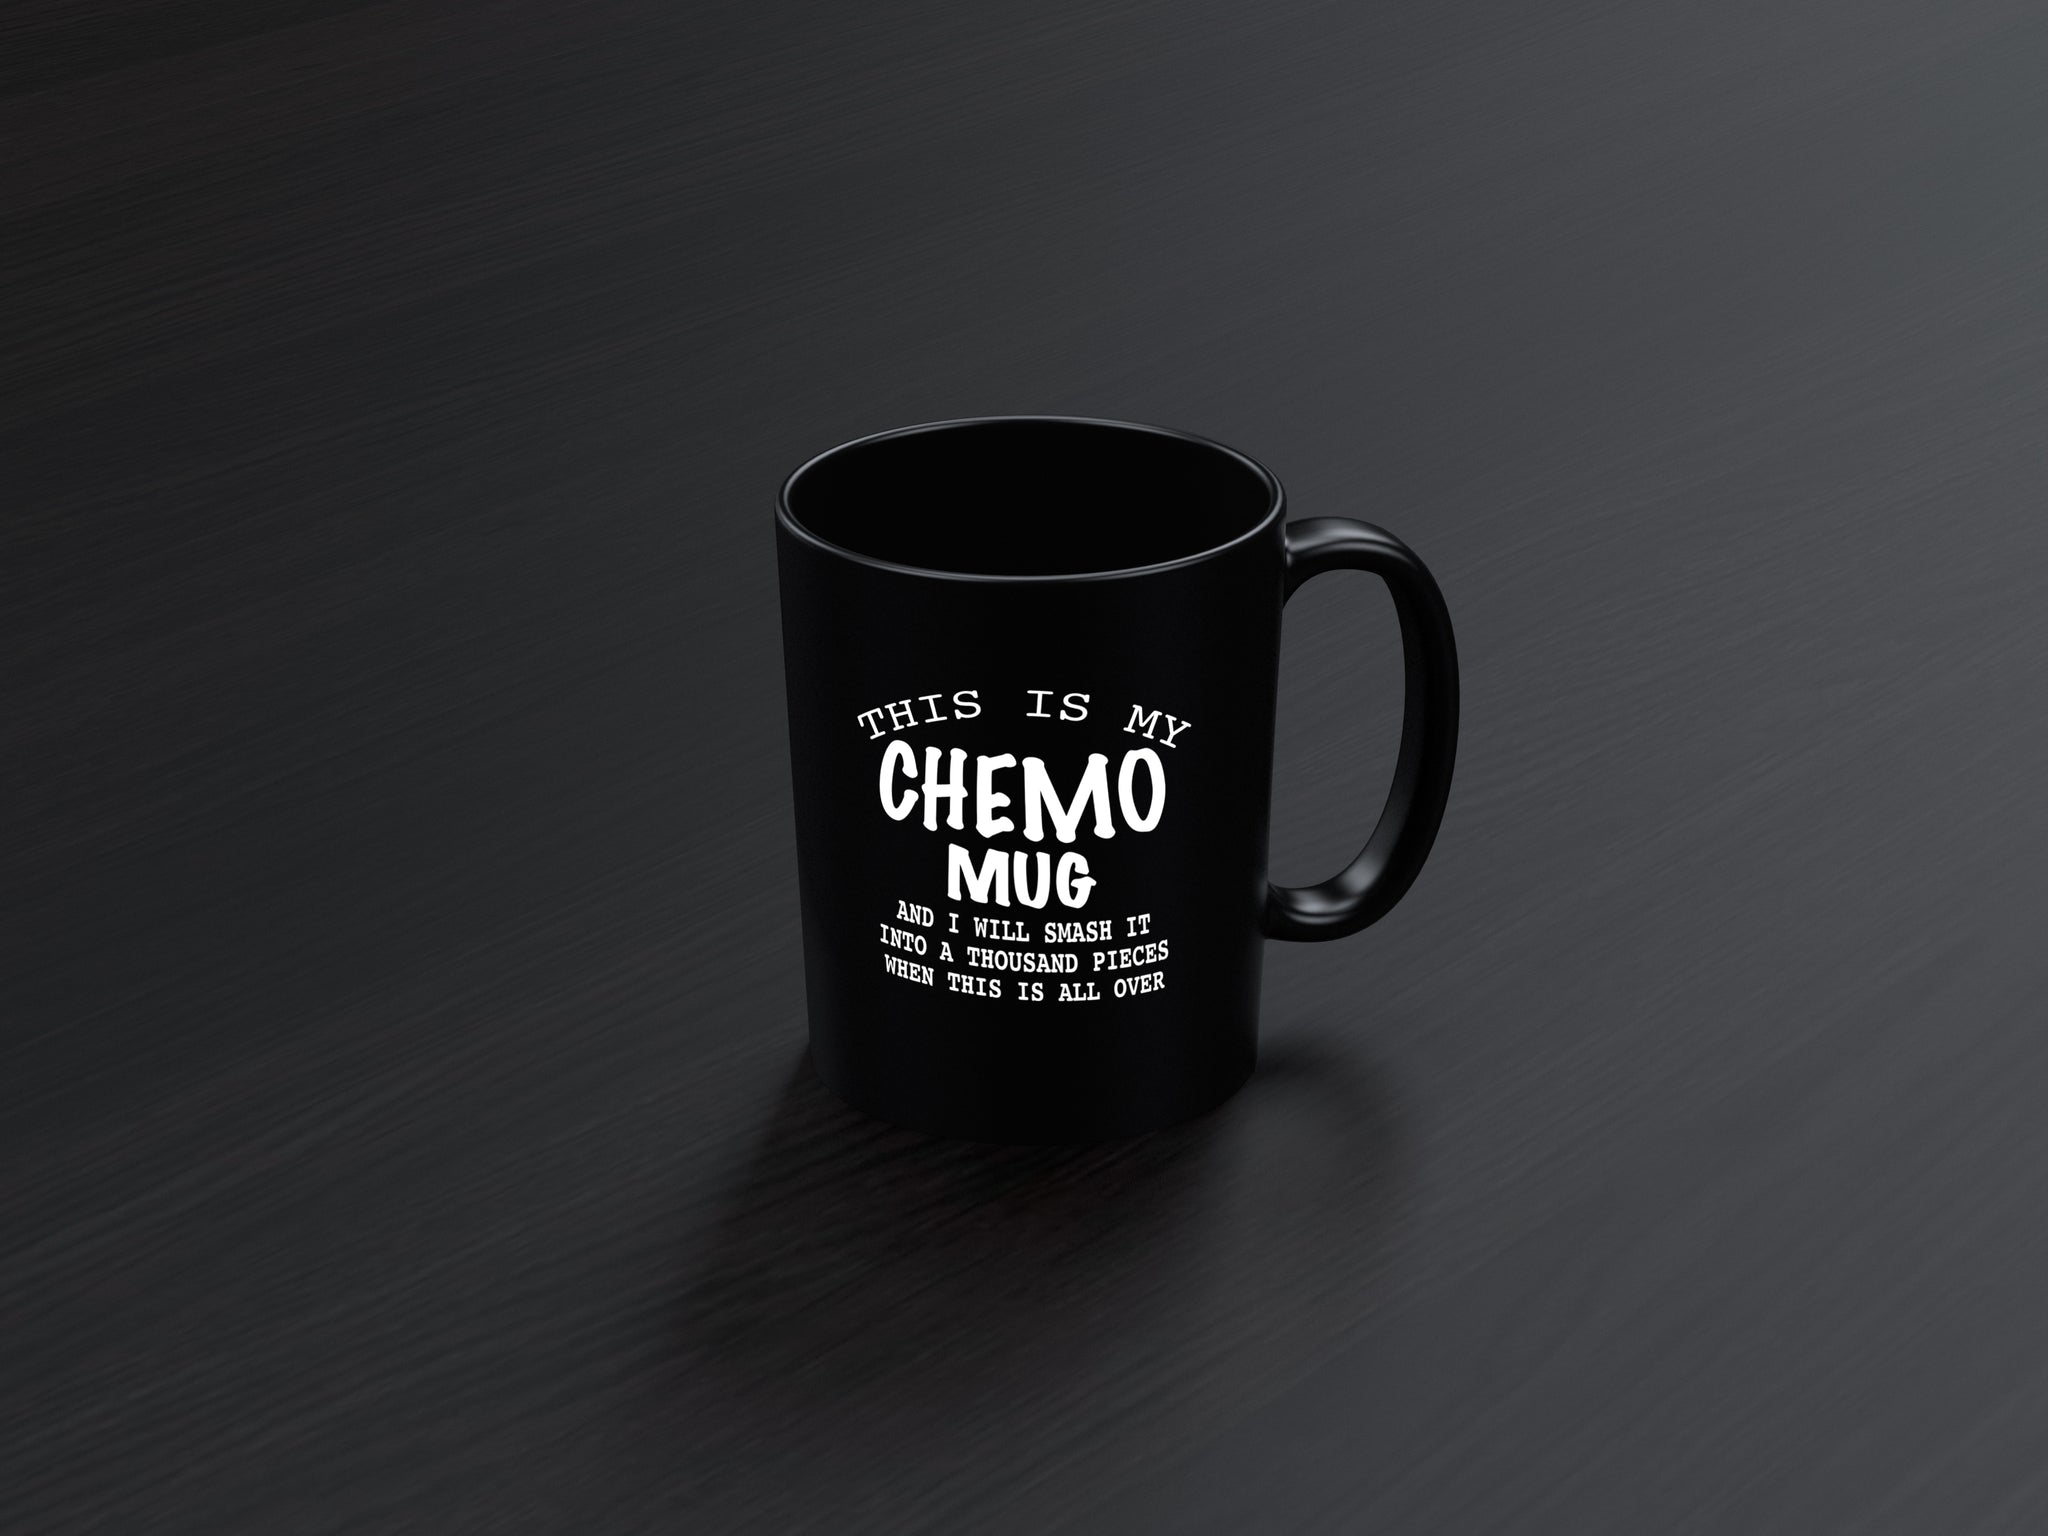 This Is My Chemo Mug Skitongifts Funny Ceramic Coffee Mug For Birthday, Mother's Day, Father's Day, Christmas